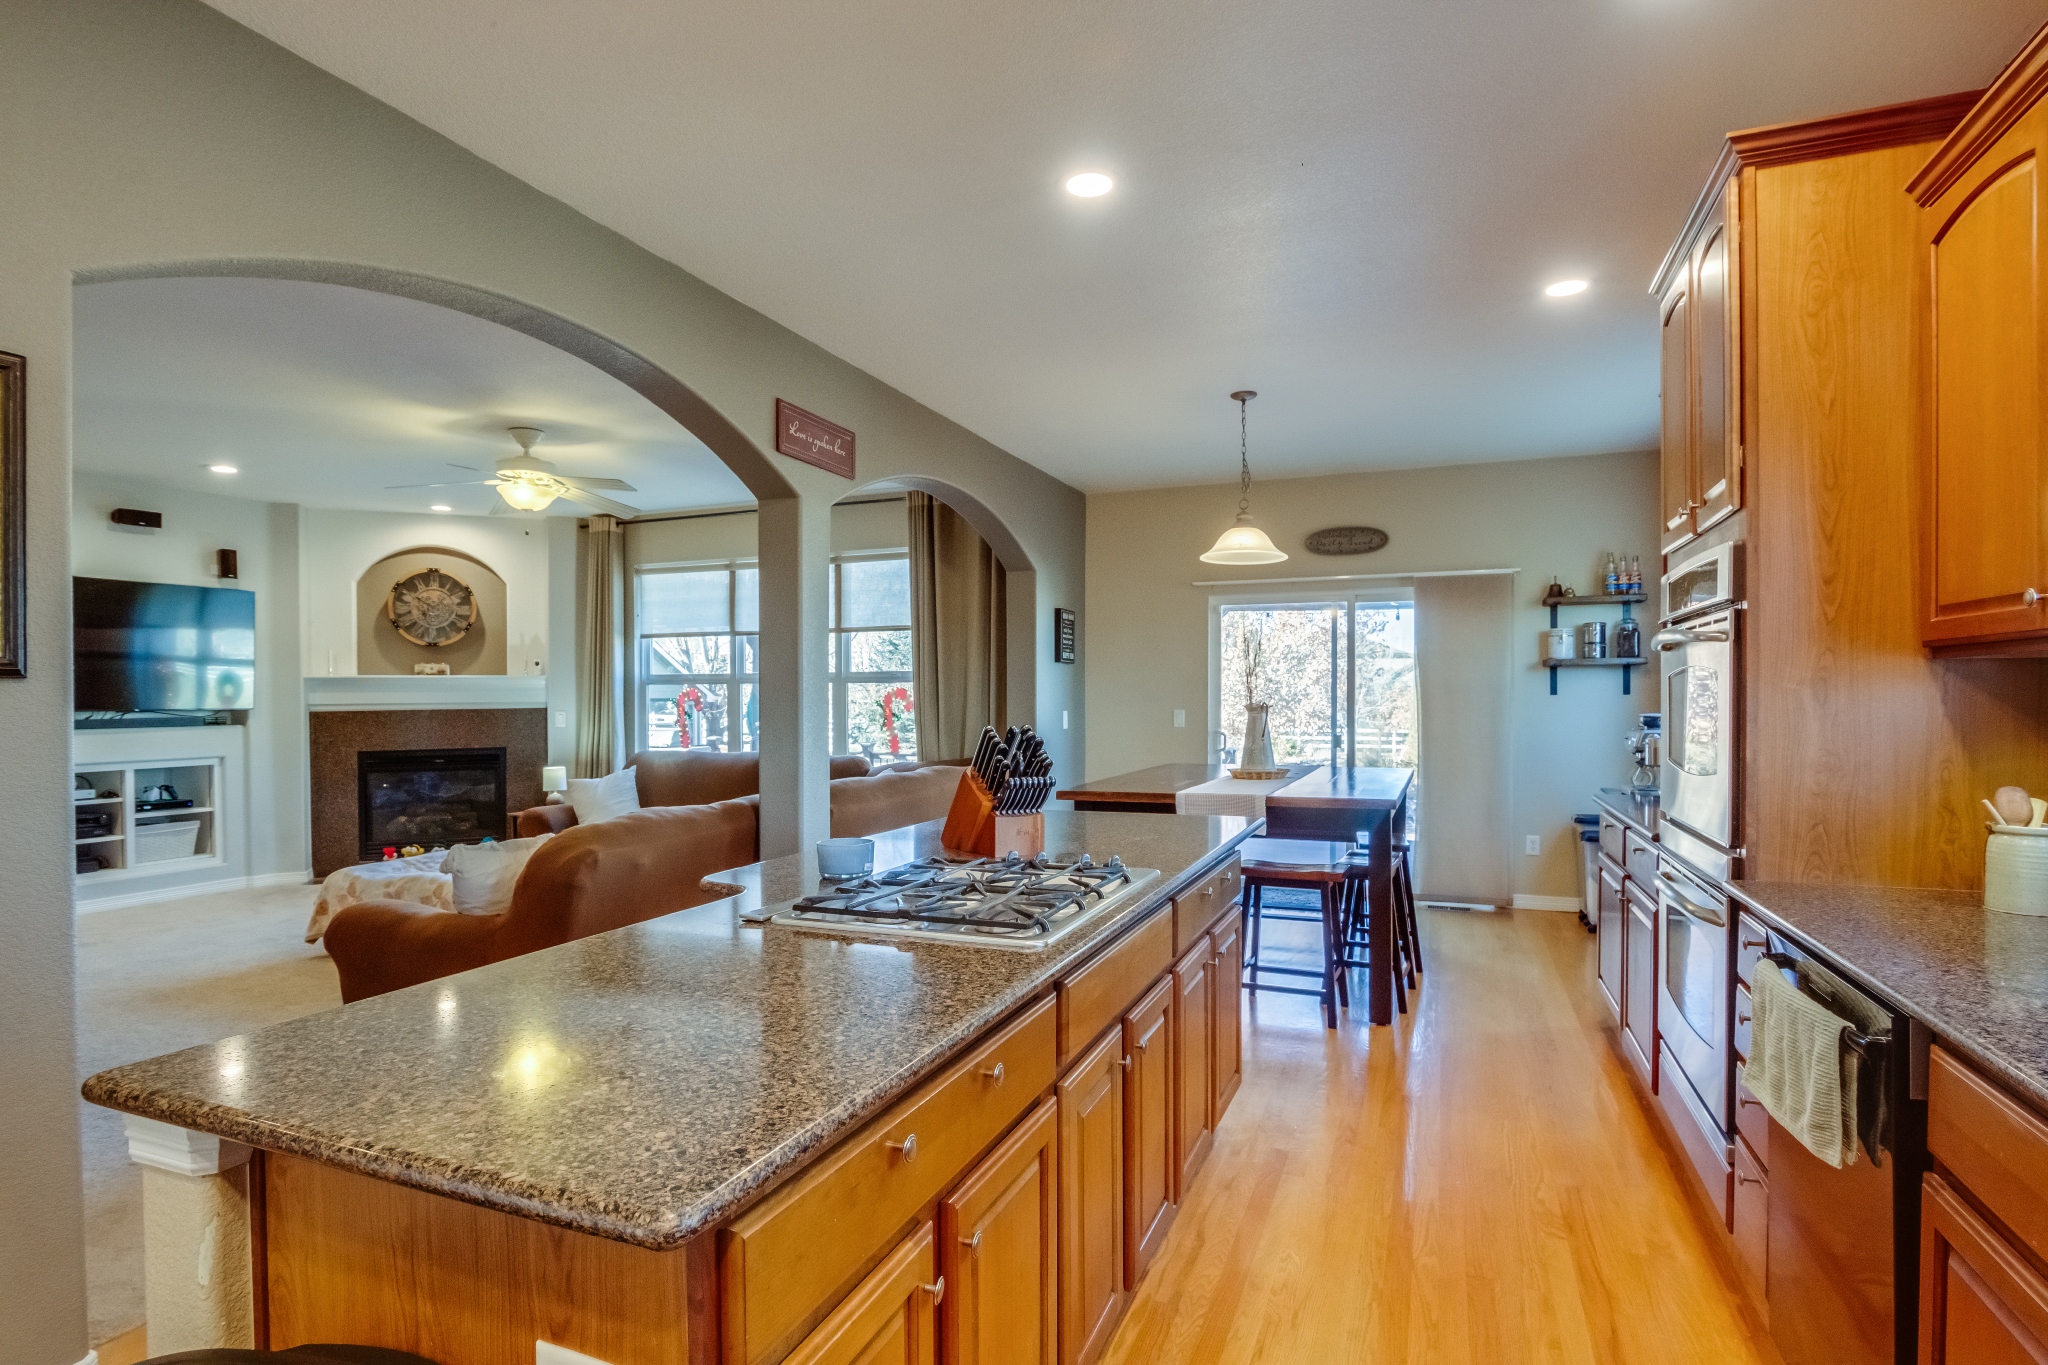 REAL ESTATE LISTING: 16263 Olive Way kitchen and family room